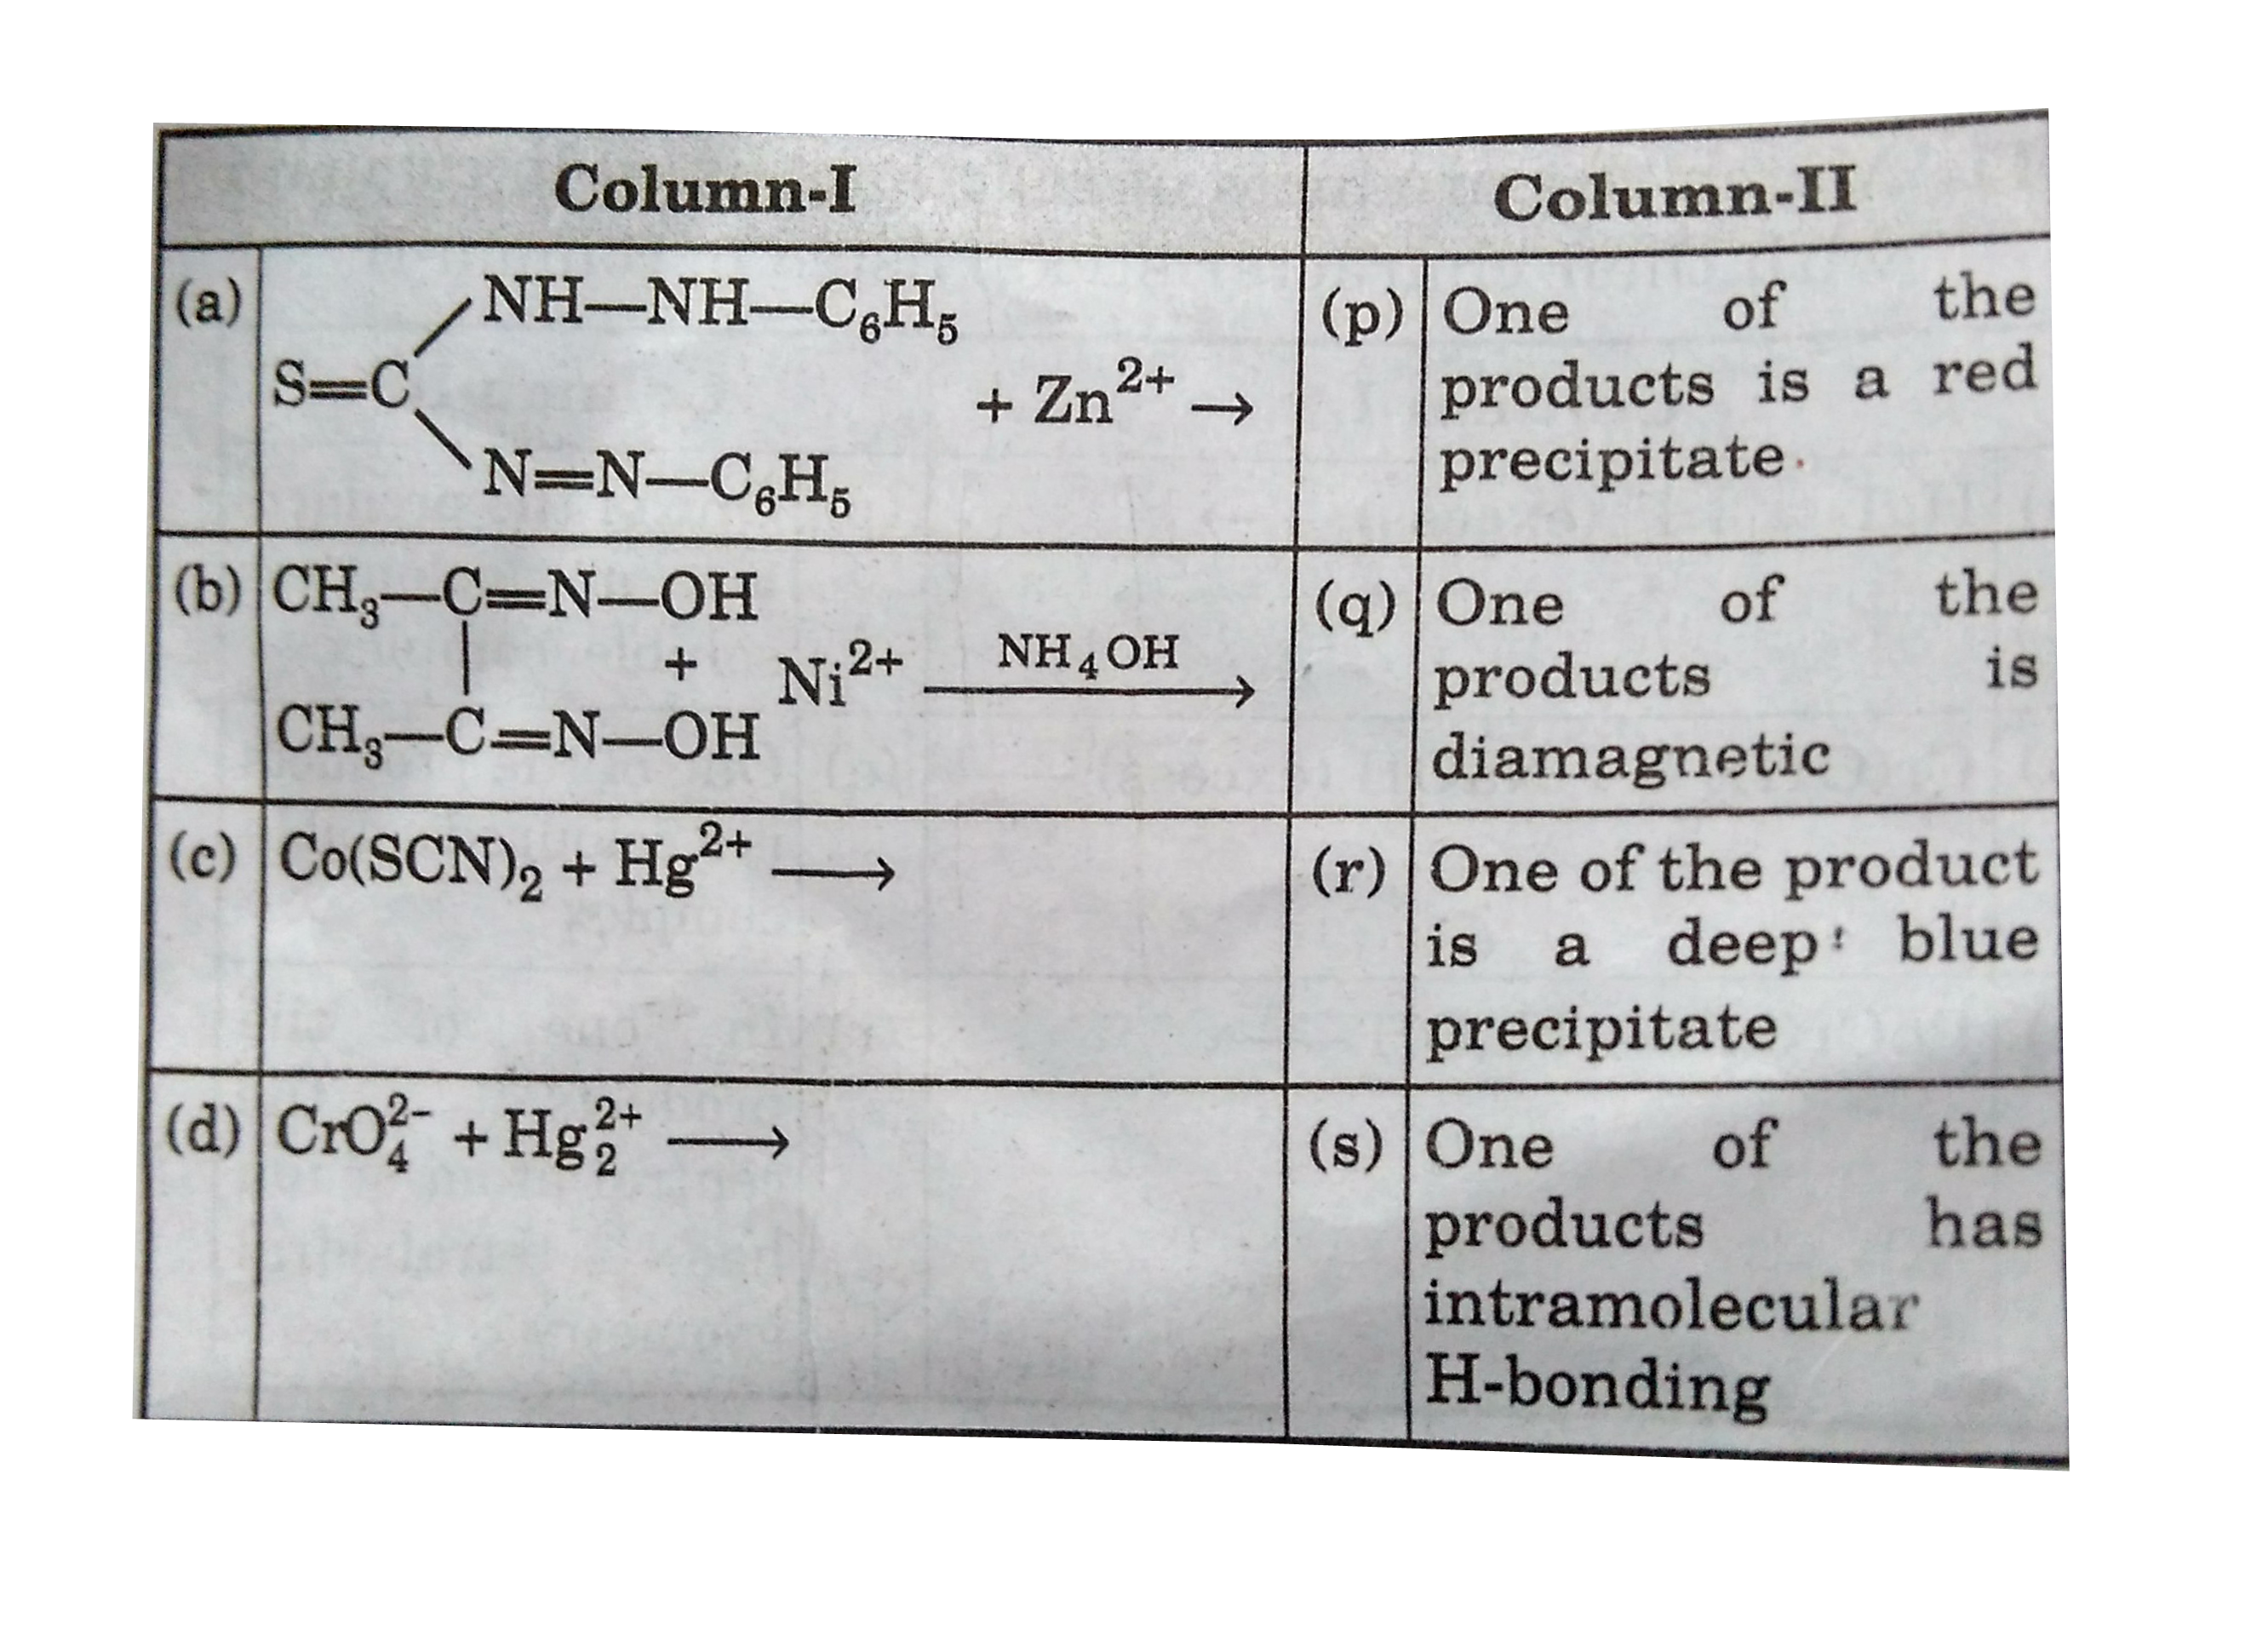 Match the reaction products of the reactions listed in column-I with the colour of the precipitate (product)/characteristics listed in column-II.